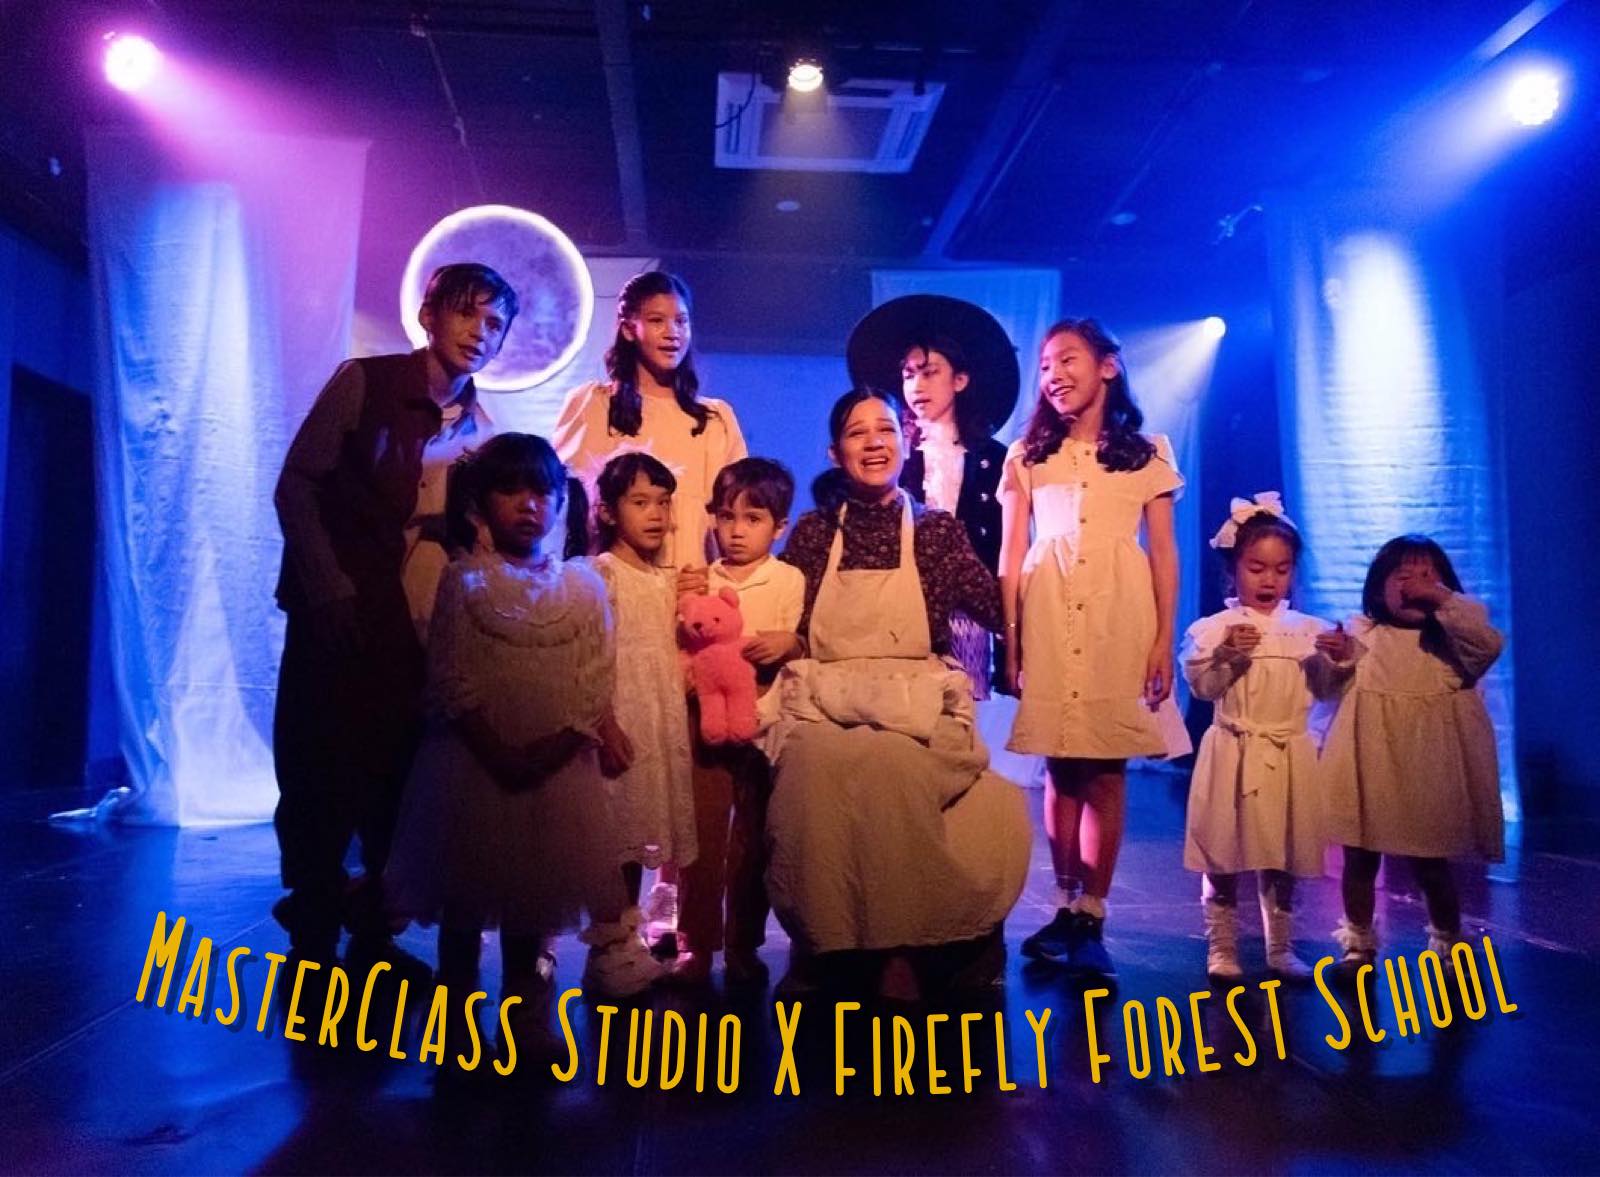 Firefly Forest School Theater Project 2022 x MasterClass Studio Production 

เรา…